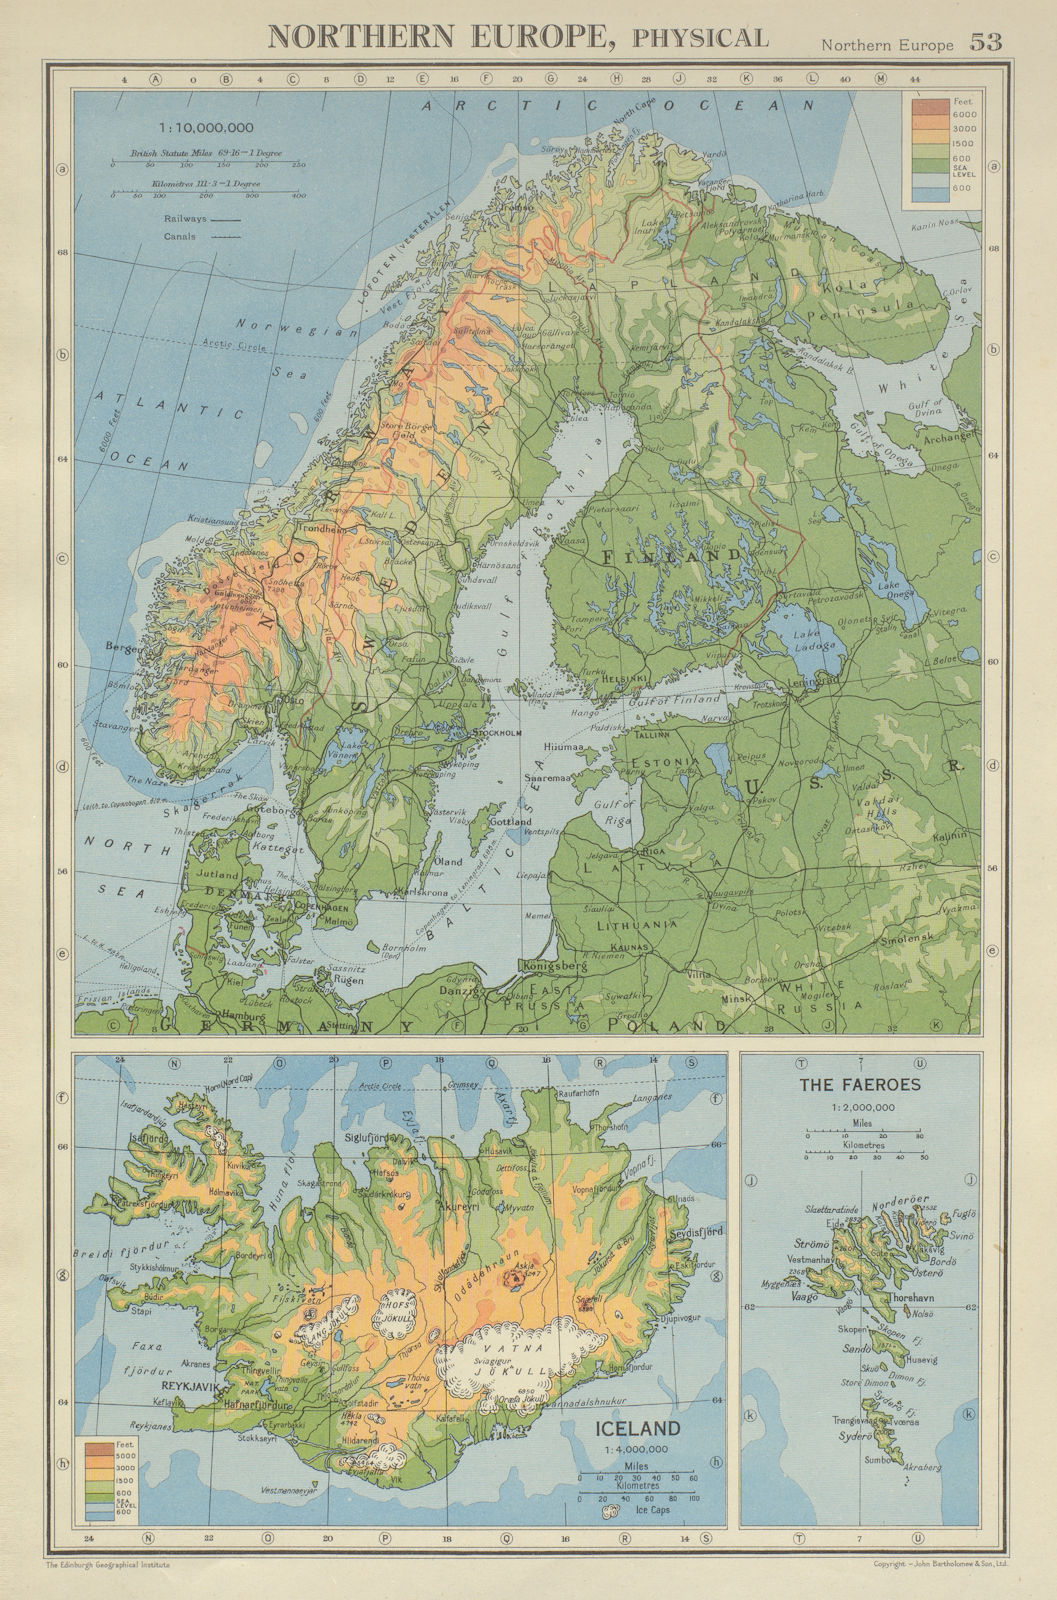 Associate Product SCANDINAVIA PHYSICAL. Norway Sweden Denmark Finland 1947 old vintage map chart